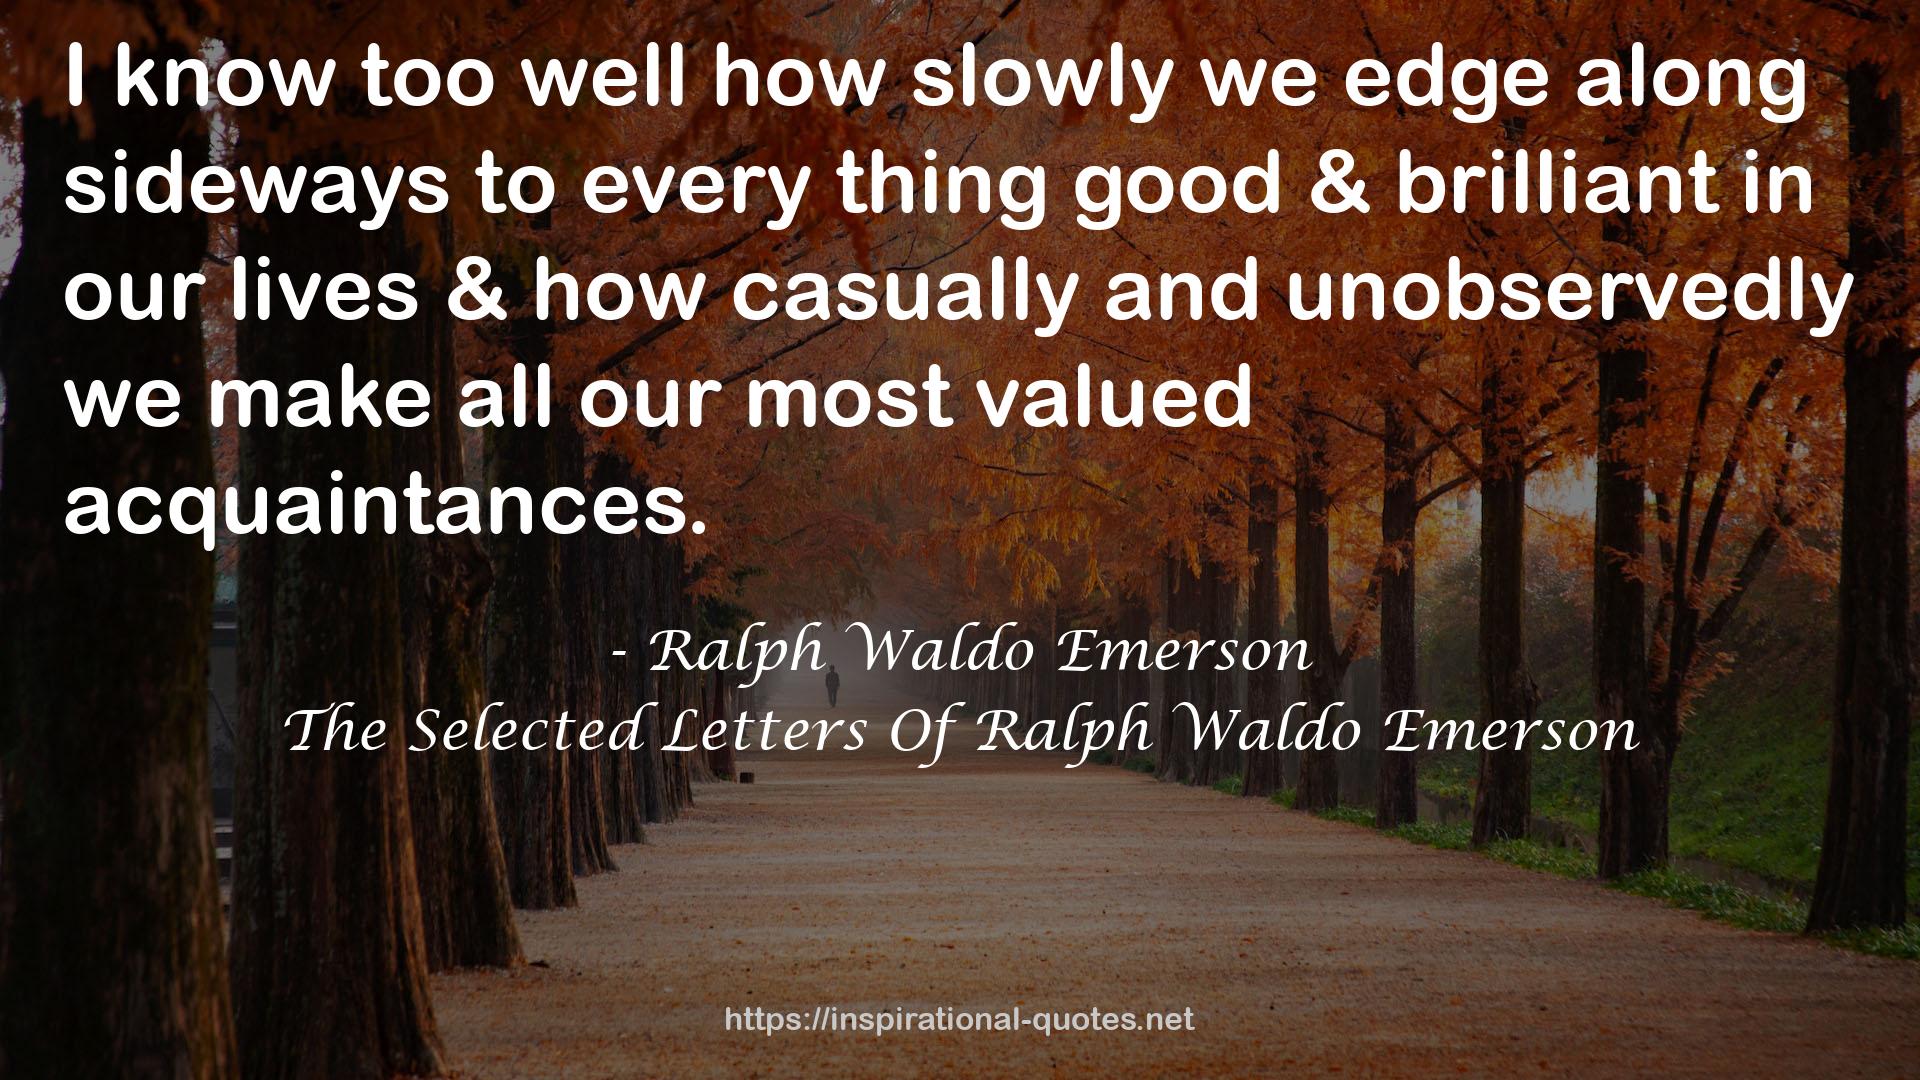 The Selected Letters Of Ralph Waldo Emerson QUOTES